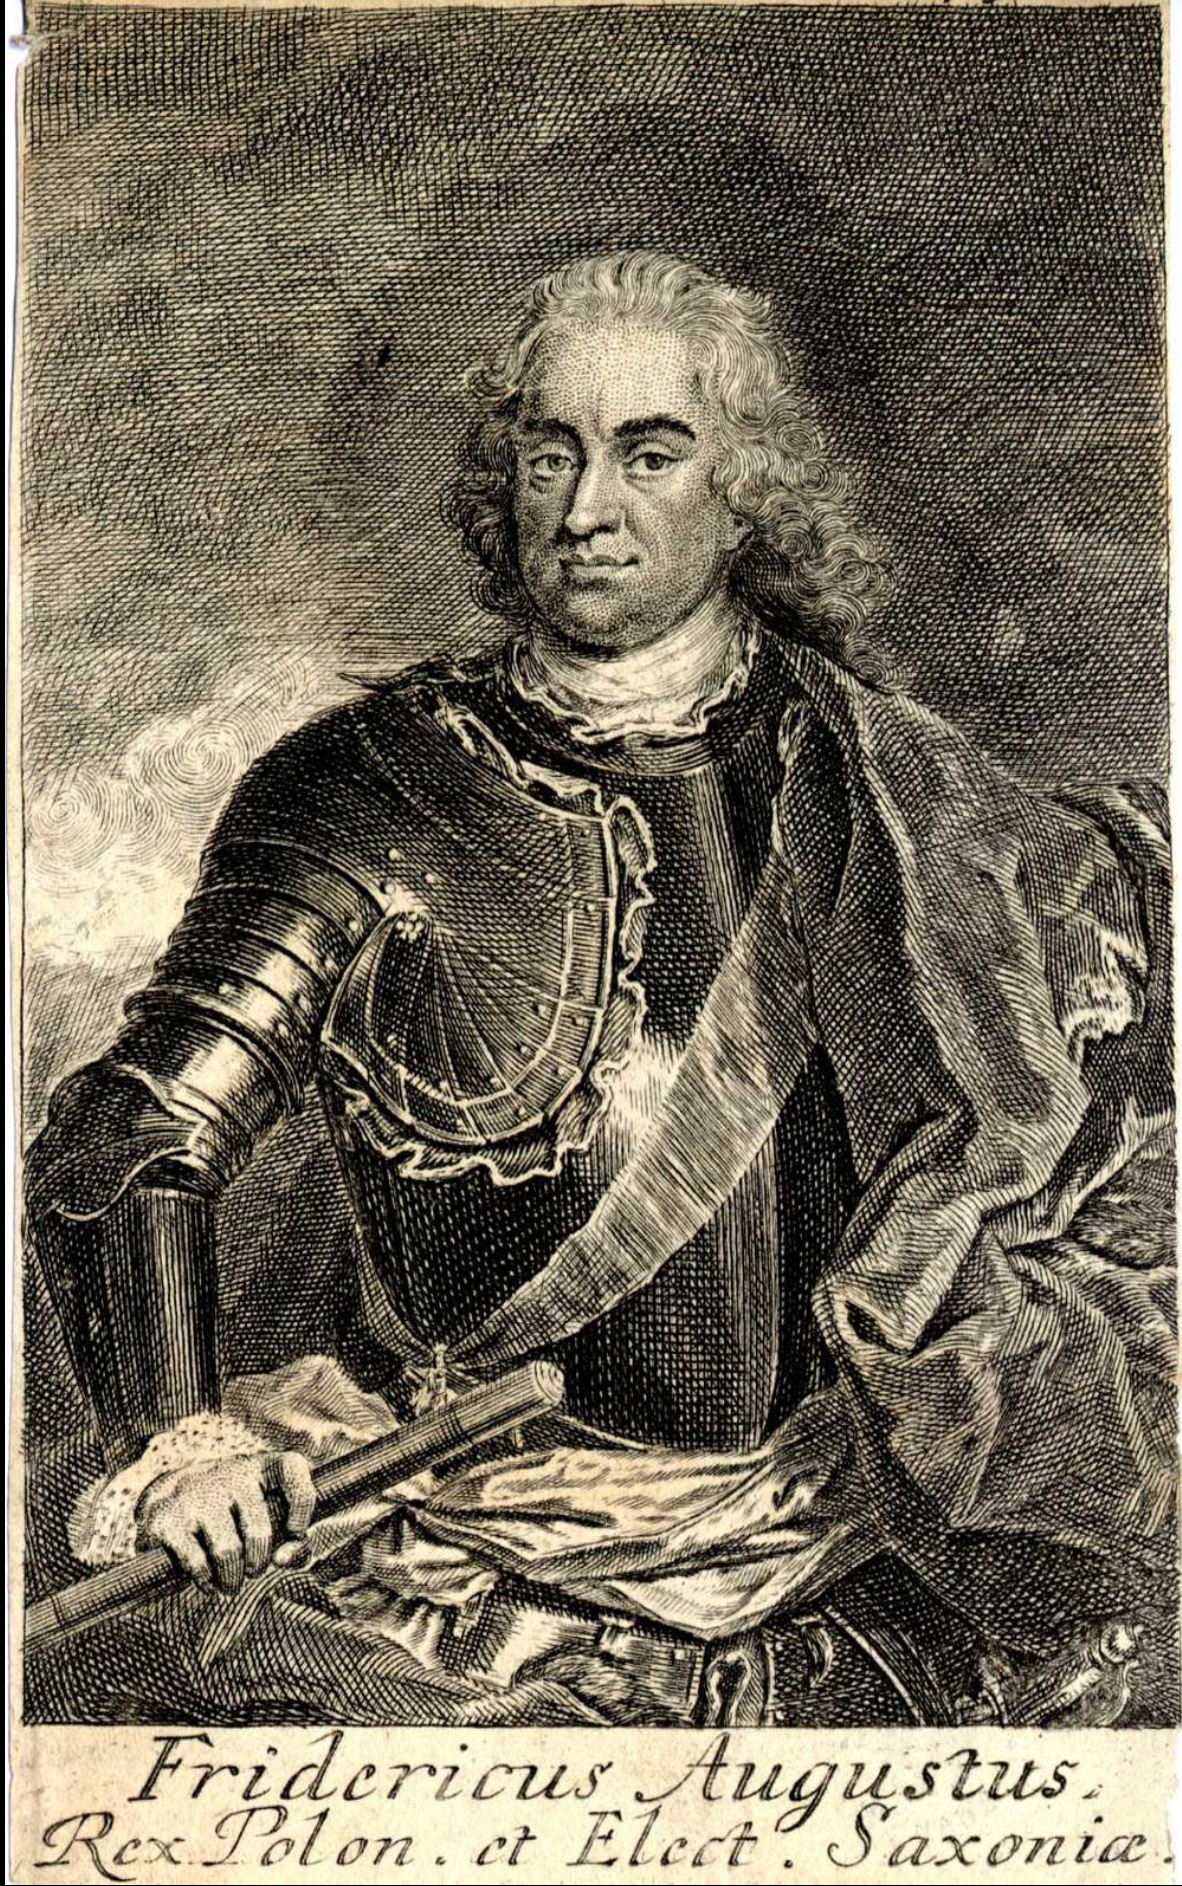 A black and white print of a man with long curly hair wearing fitted metal armor with a cape wrapped around his left arm and shoulder. In his right arm he holds a wooden baton.  At the bottom of the image the text says &ldquo;Fridericus Augustus Rex Polon. ct Elect. Saxonia&rdquo;